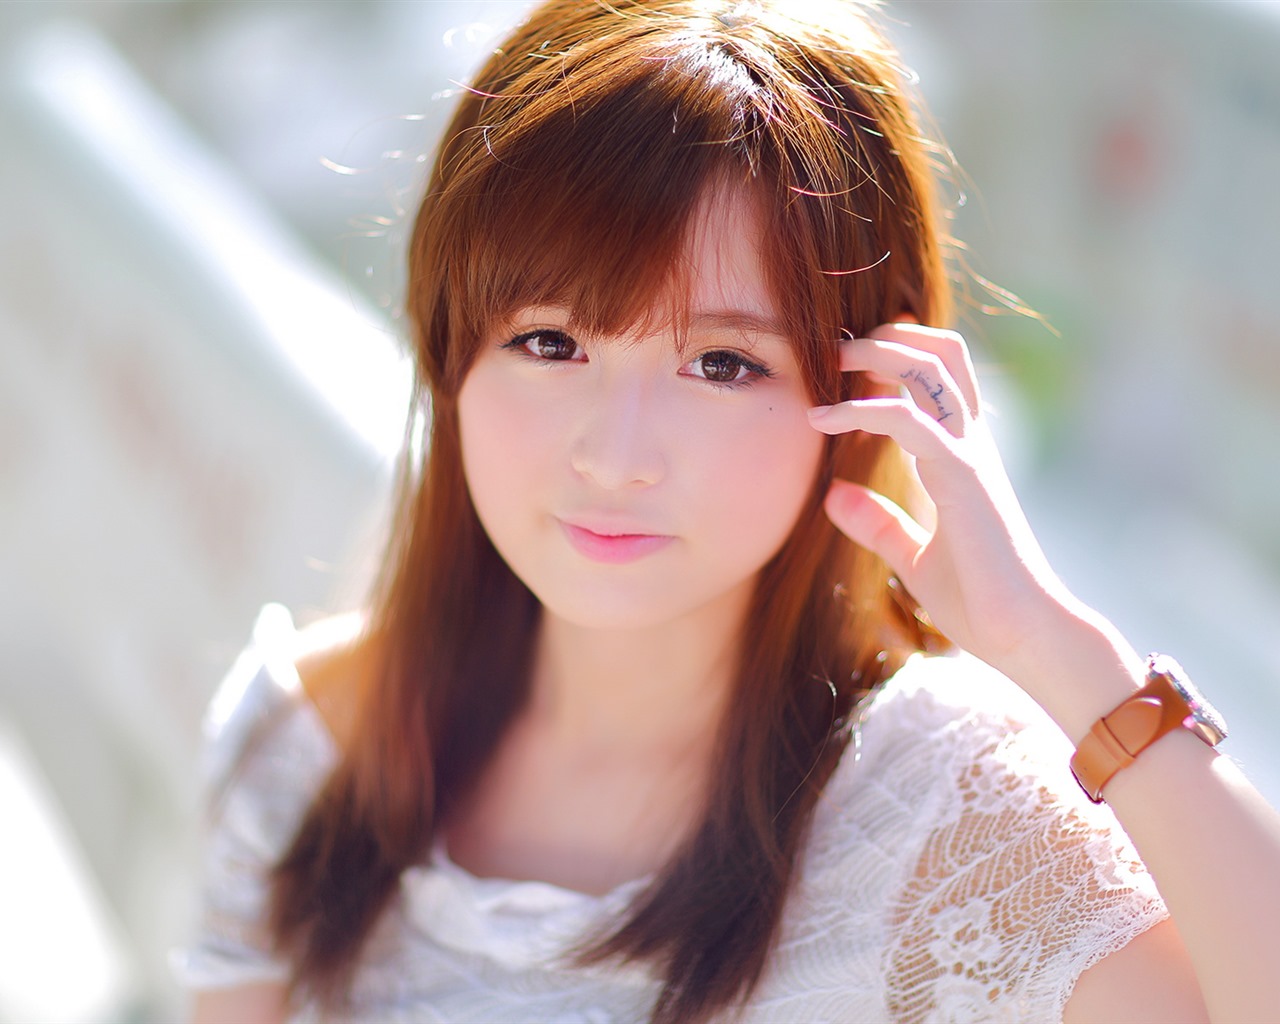 Pure and lovely young Asian girl HD wallpapers collection (2) #36 - 1280x1024